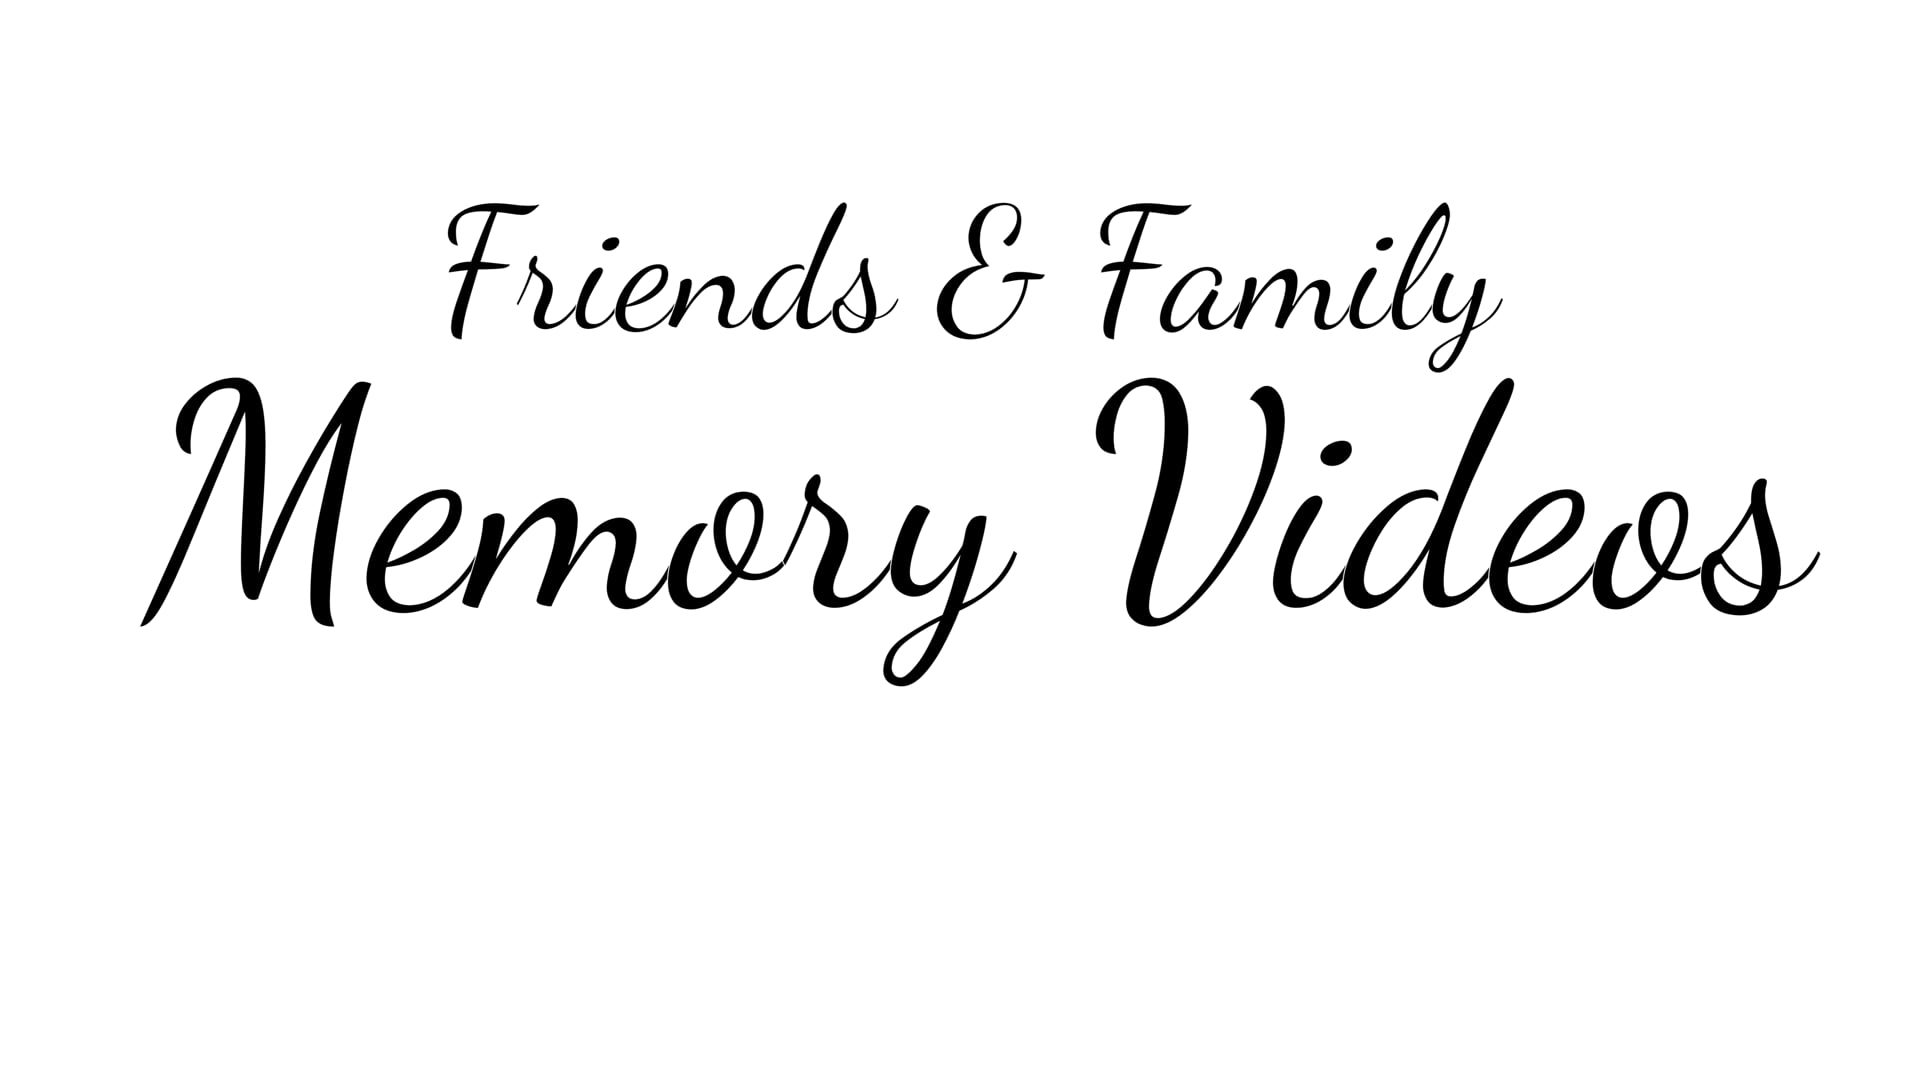 Friends & Family Memory Video ©MOSSYMEDIA